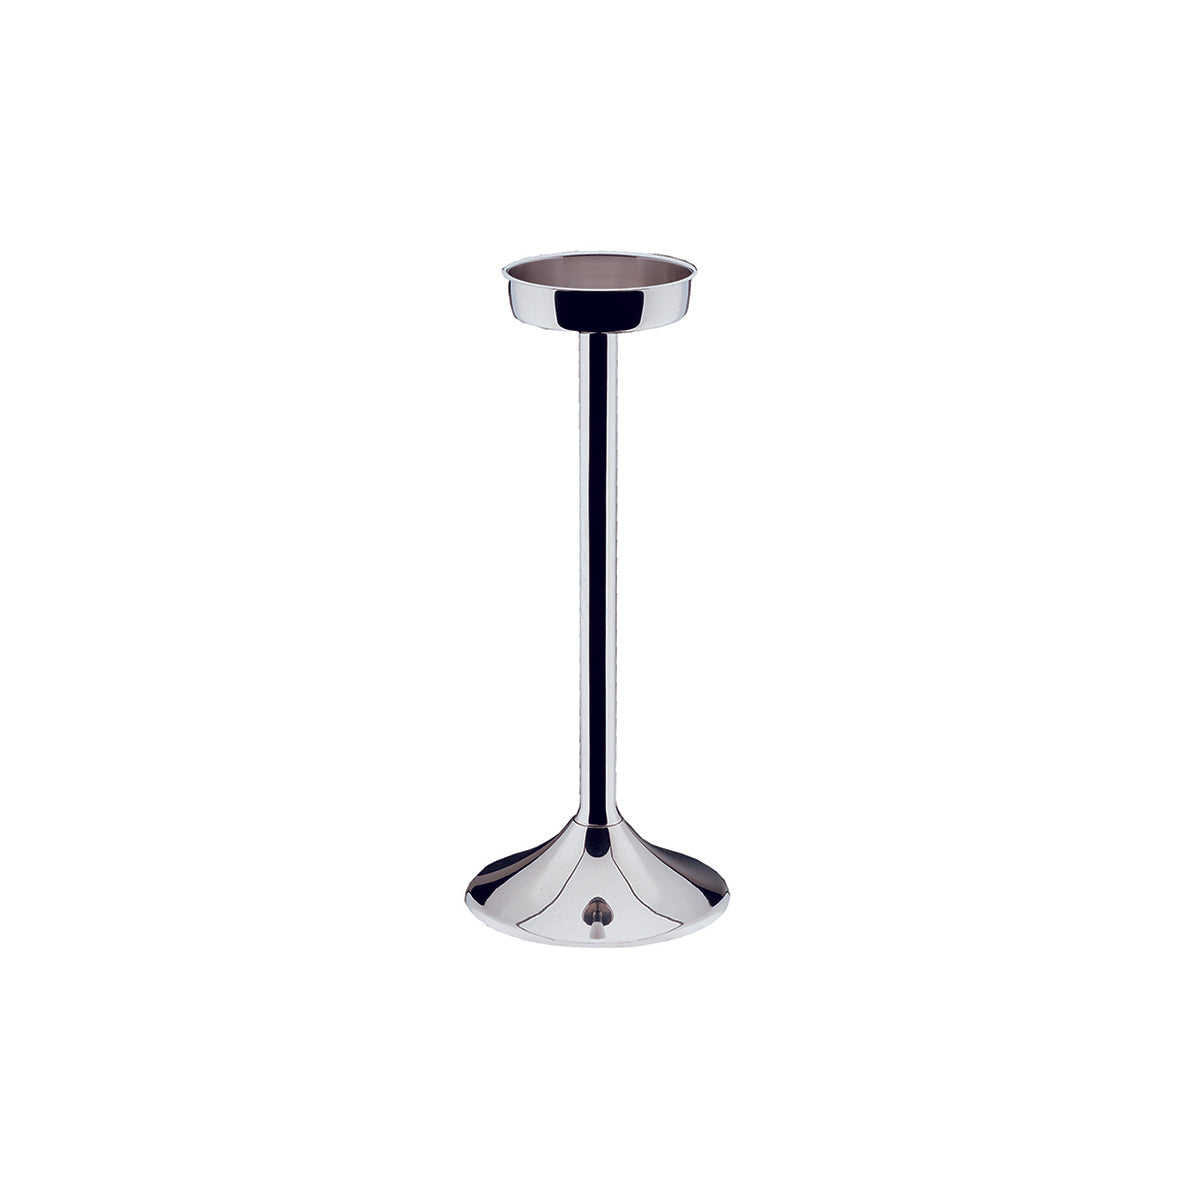 06.8337.6040 WMF Neutral Wine Cooler Stand 160x600mm Stainless Steel Tomkin Australia Hospitality Supplies